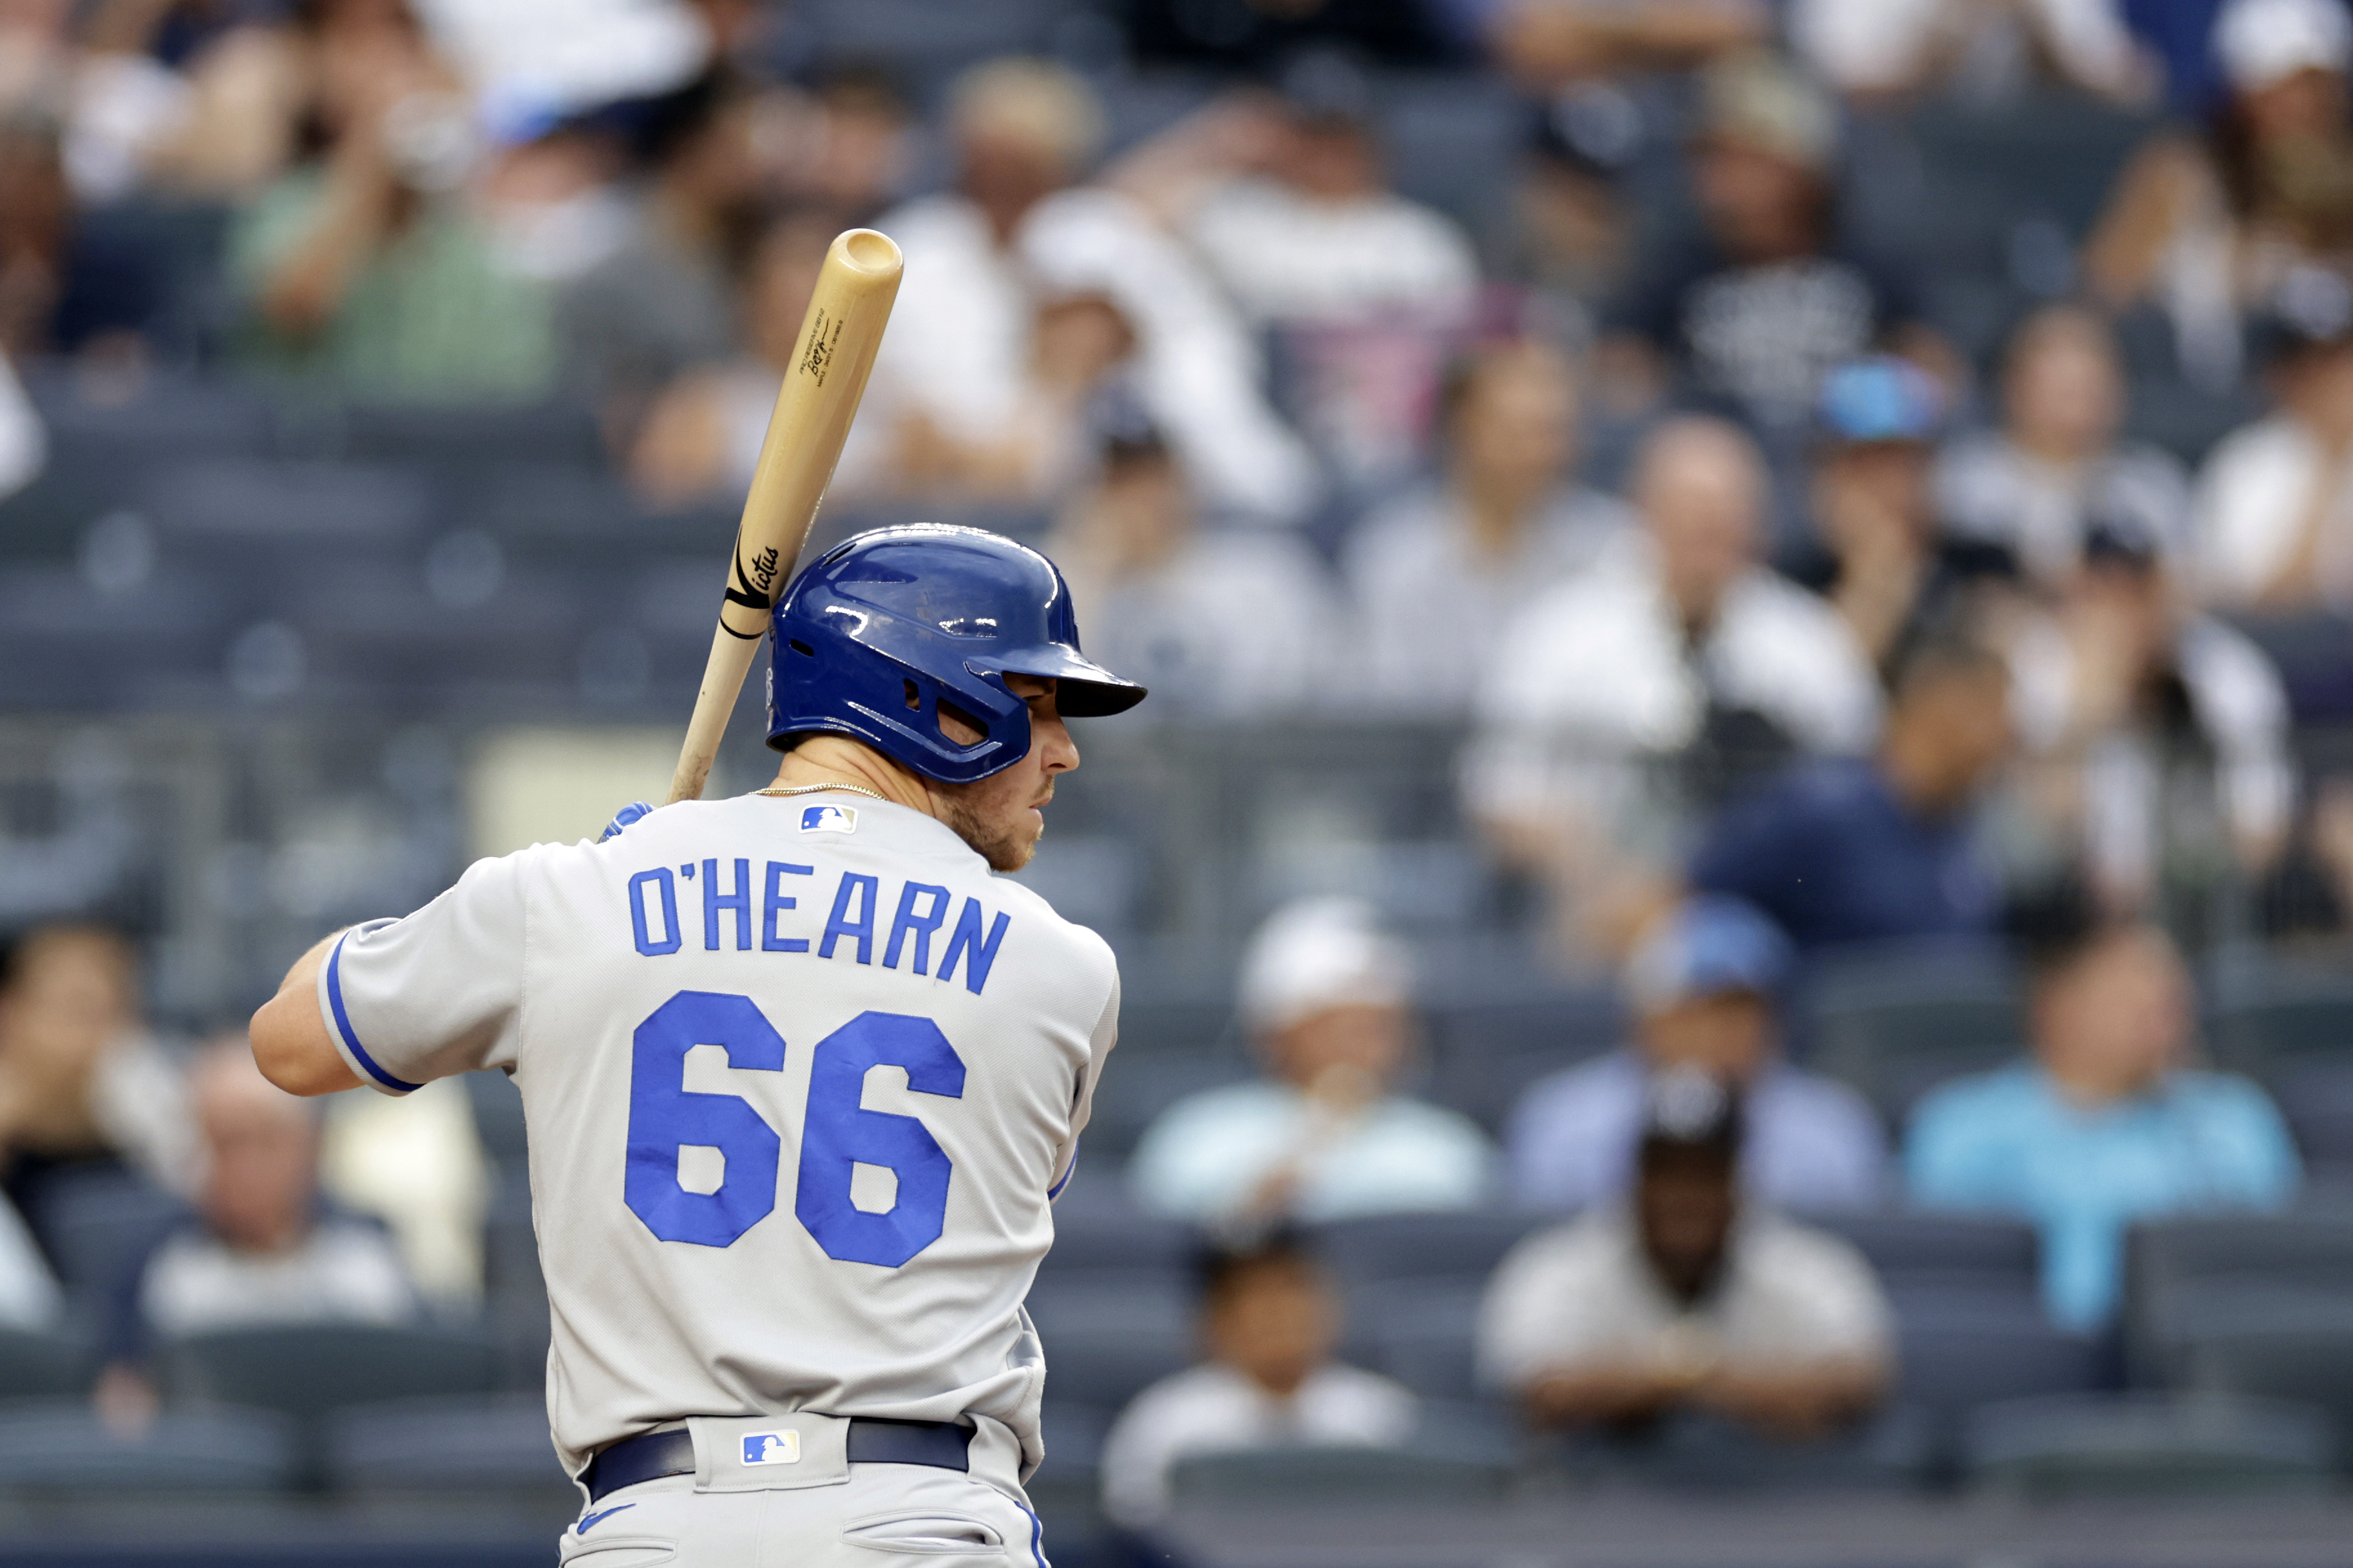 Ryan O’Hearn #66 of the Kansas City Royals at bat against the New York Yankees during the first inning at Yankee Stadium on July 28, 2022 in New York City.